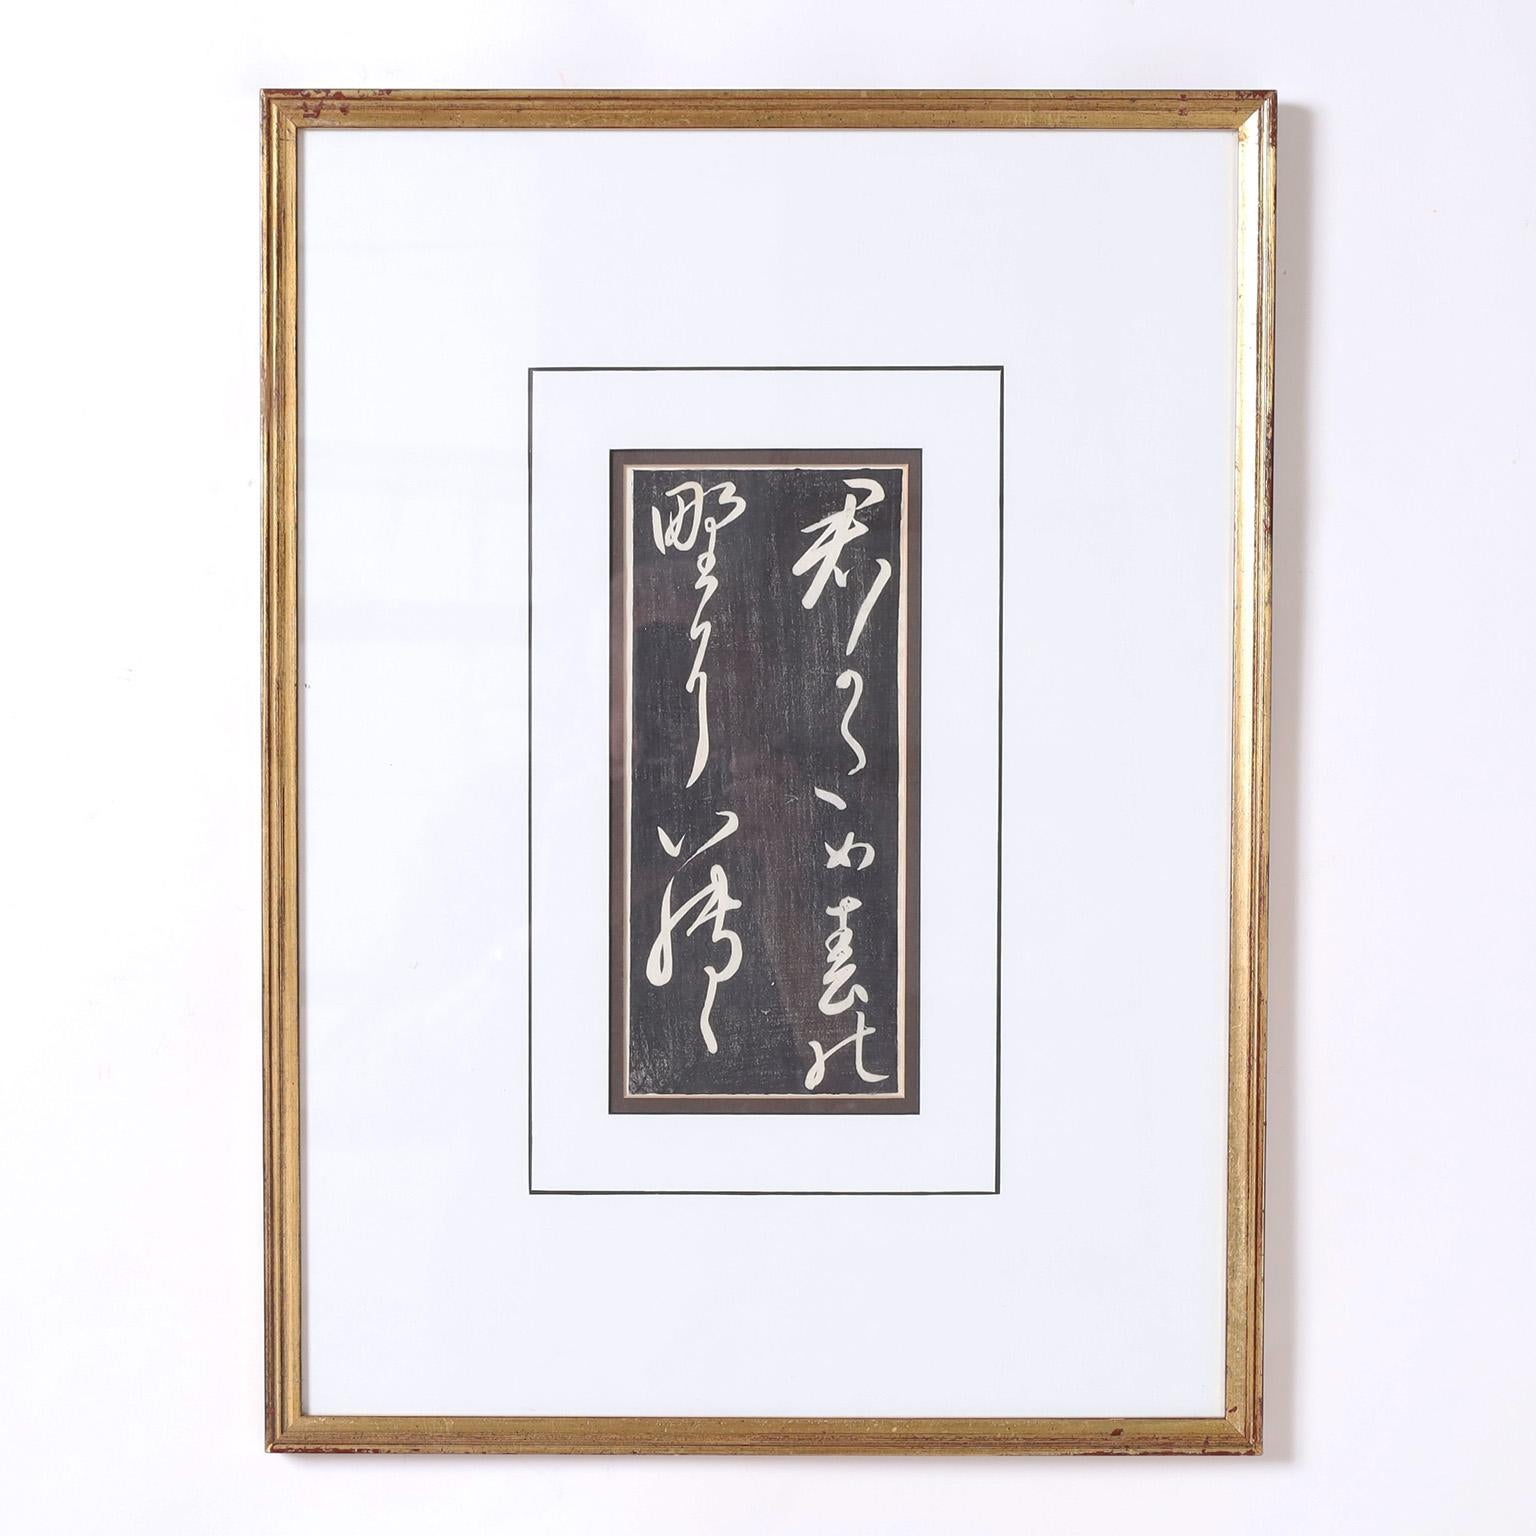 Rare and remarkable set of ten 19th century Japanese calligraphy prints on paper executed in a woodblock technique and presented under glass in a gilt wood frame.